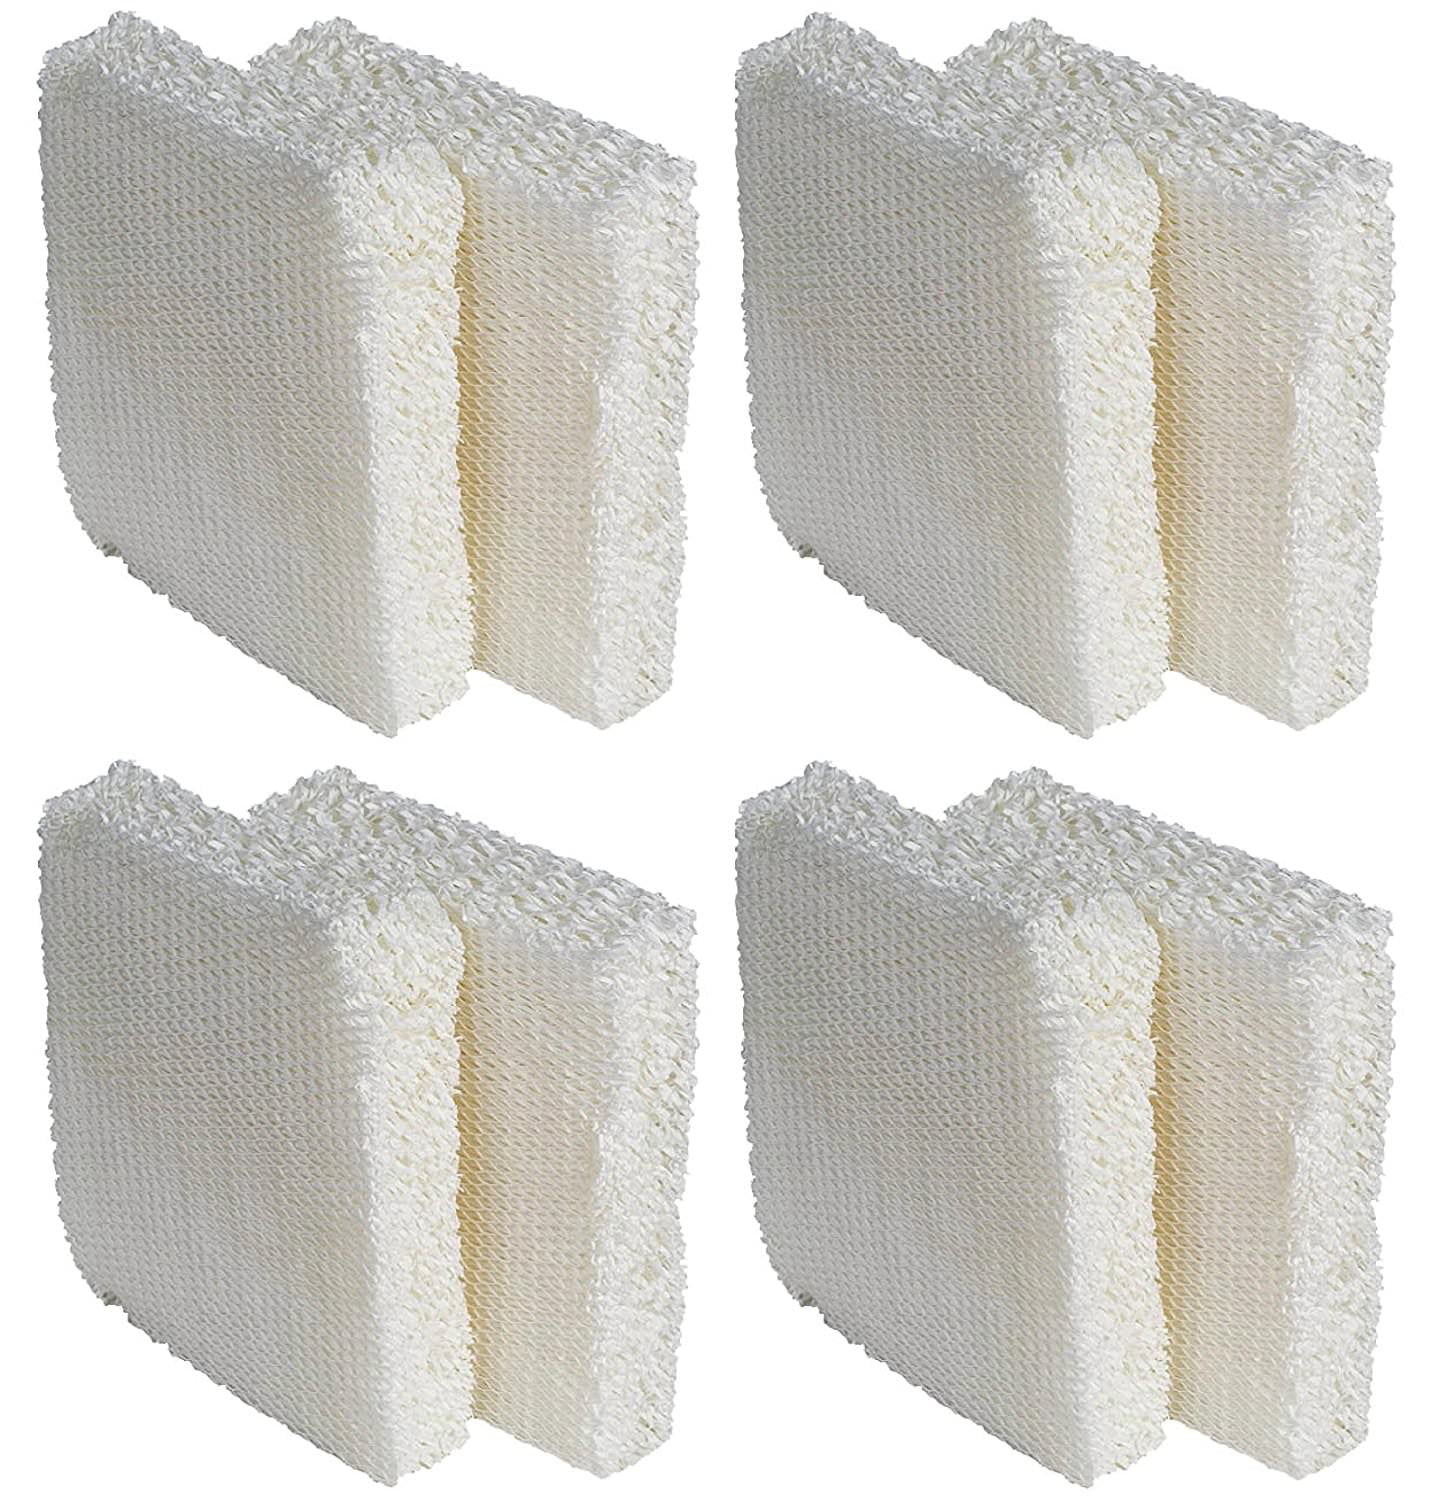 2x HQRP Wick Filters for Vornado EVAP Series Humidifier MD1-0001 MD1-0002 